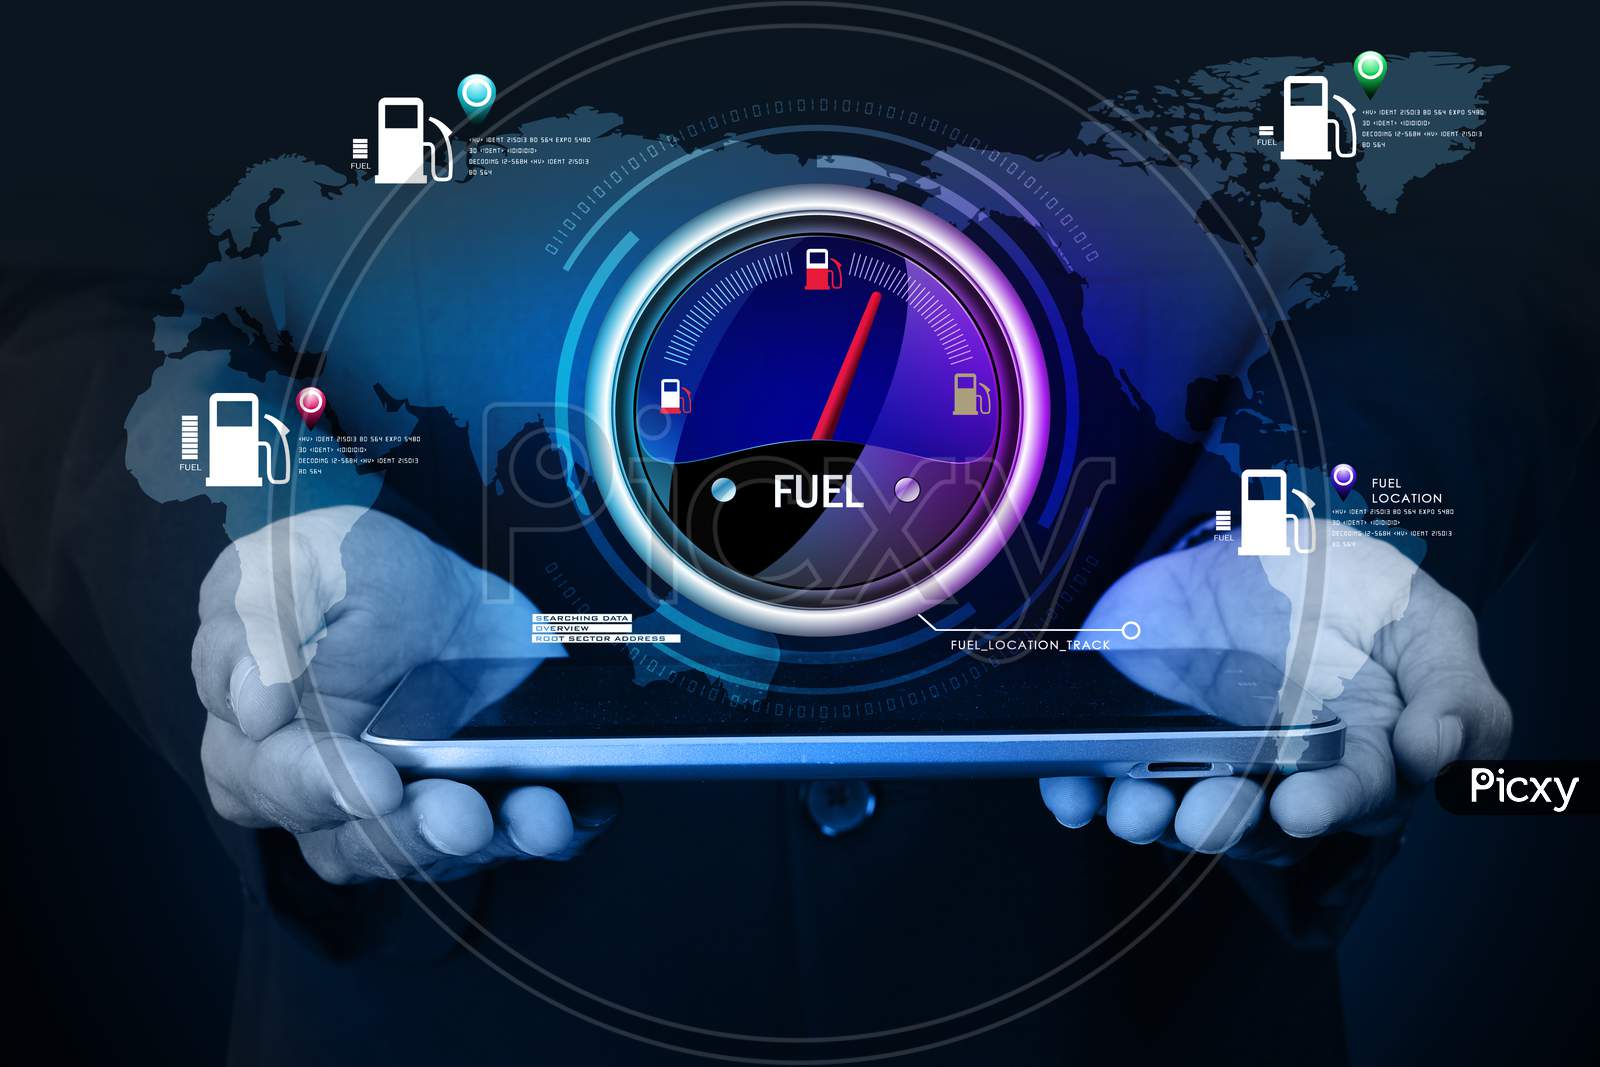 Close up shot of a Person's Hands holding Tablet or iPad with Fuel Indicator